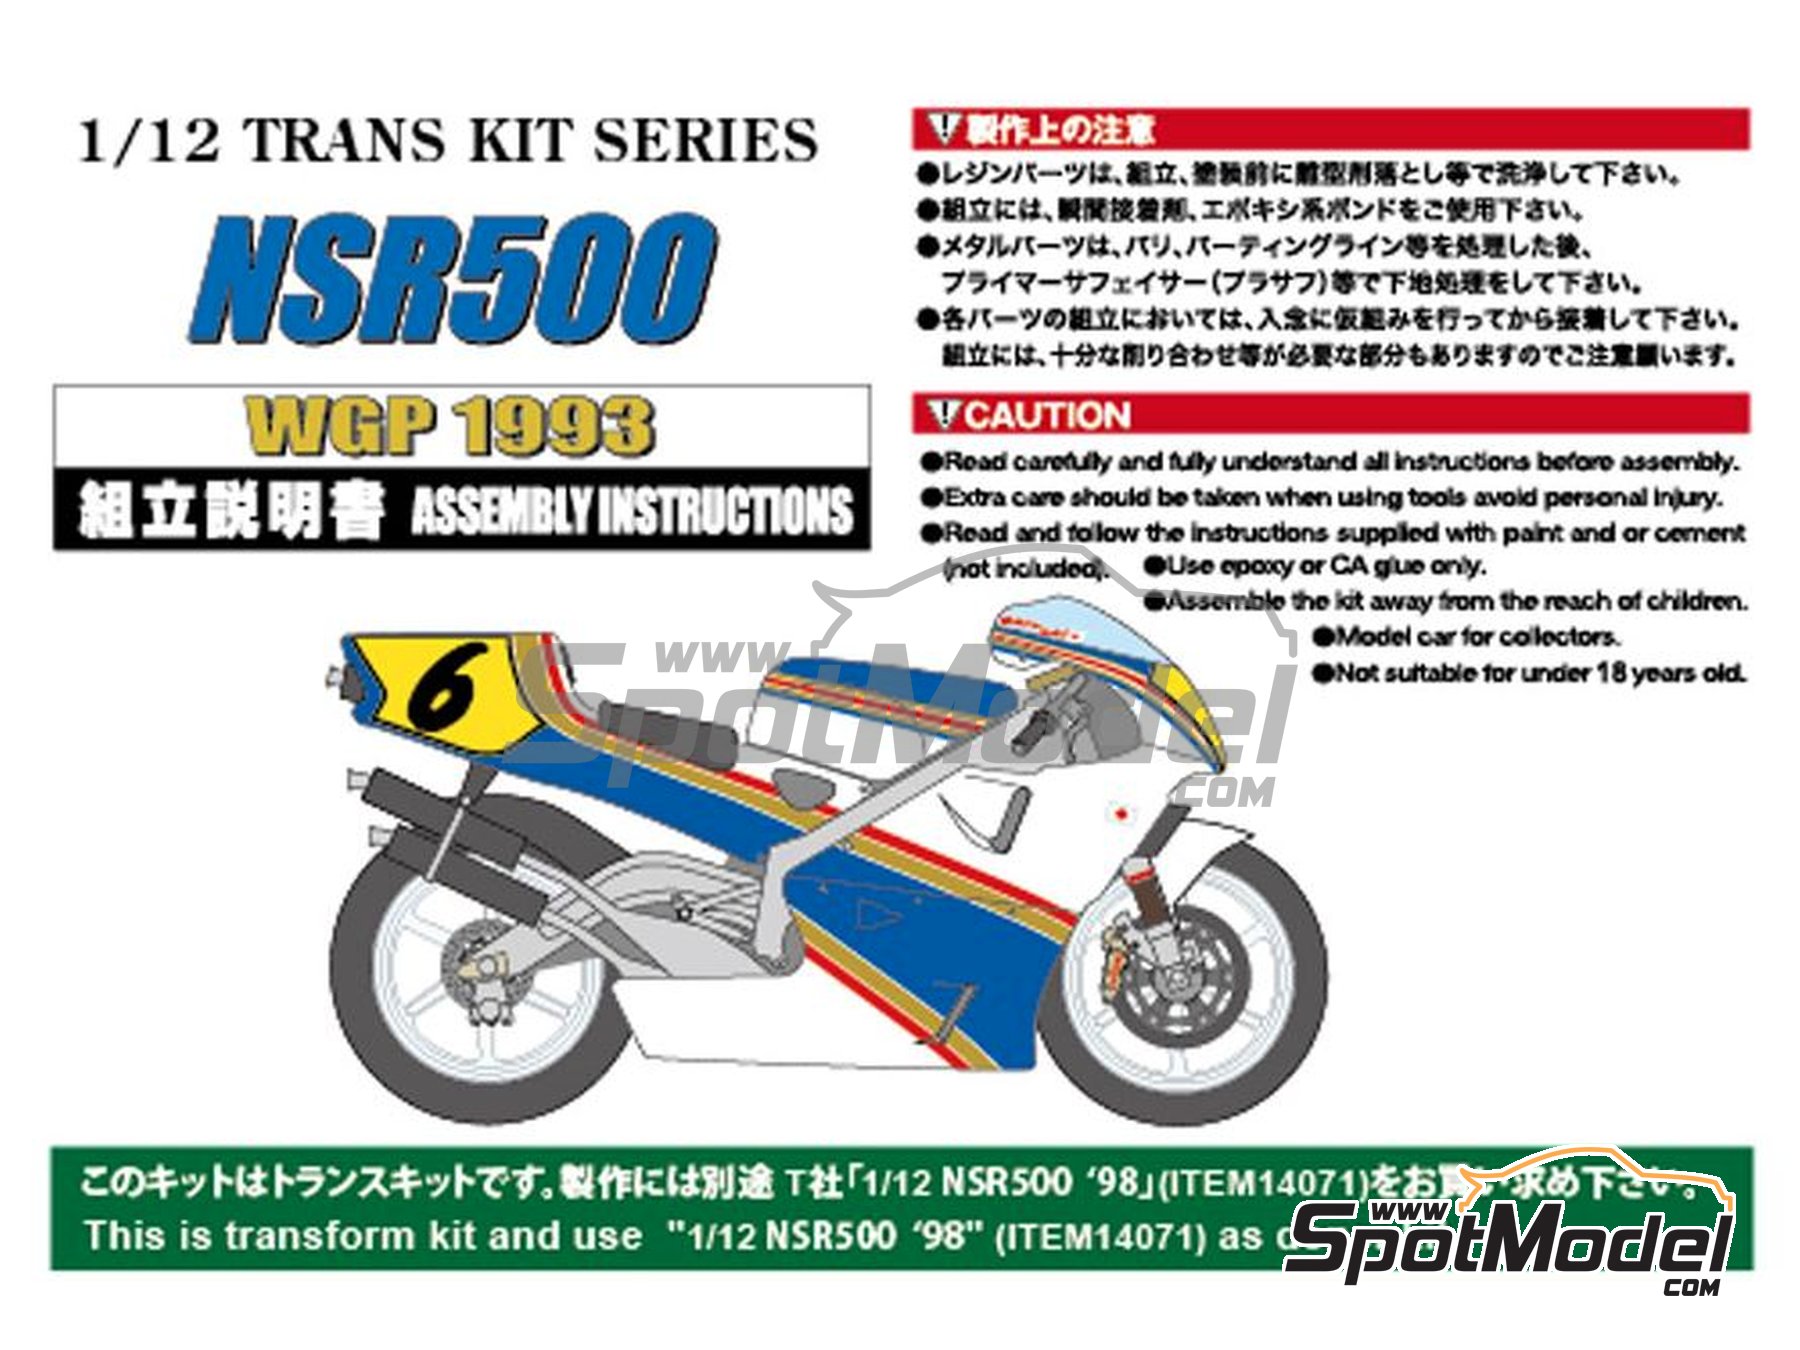 Studio27 Spare Decal SDT1226R Scale 1:12 NSR500 WGP 1993 for TK1226R from Japan 